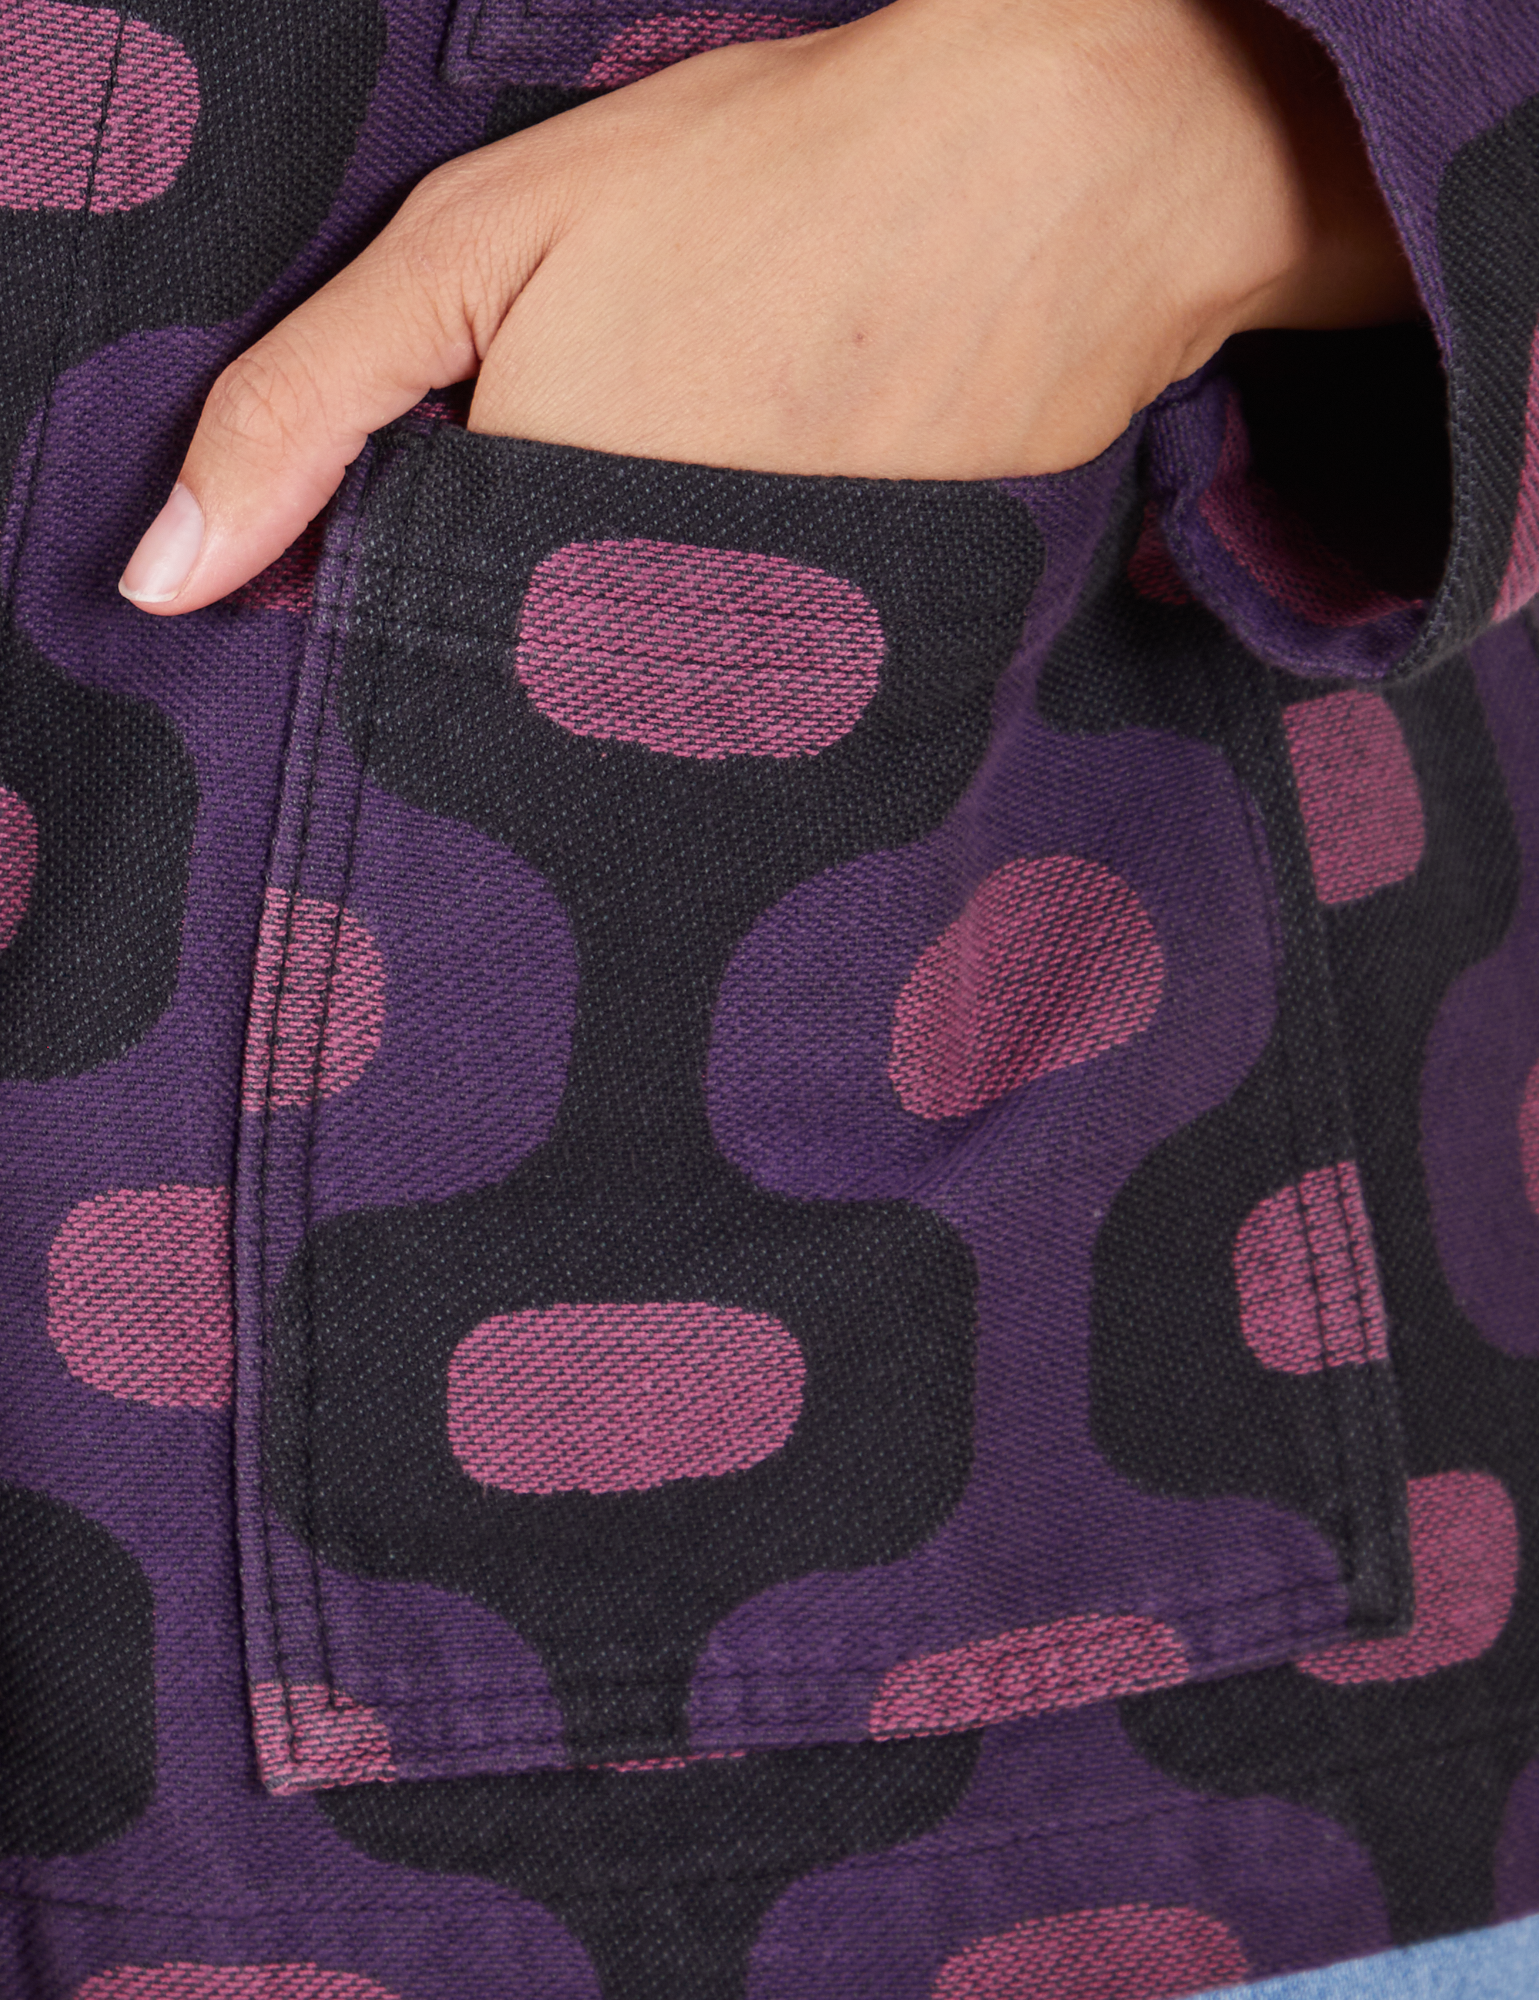  Purple Tile Jacquard Work Jacket front pocket close up. Tiara has her hand in the pocket.